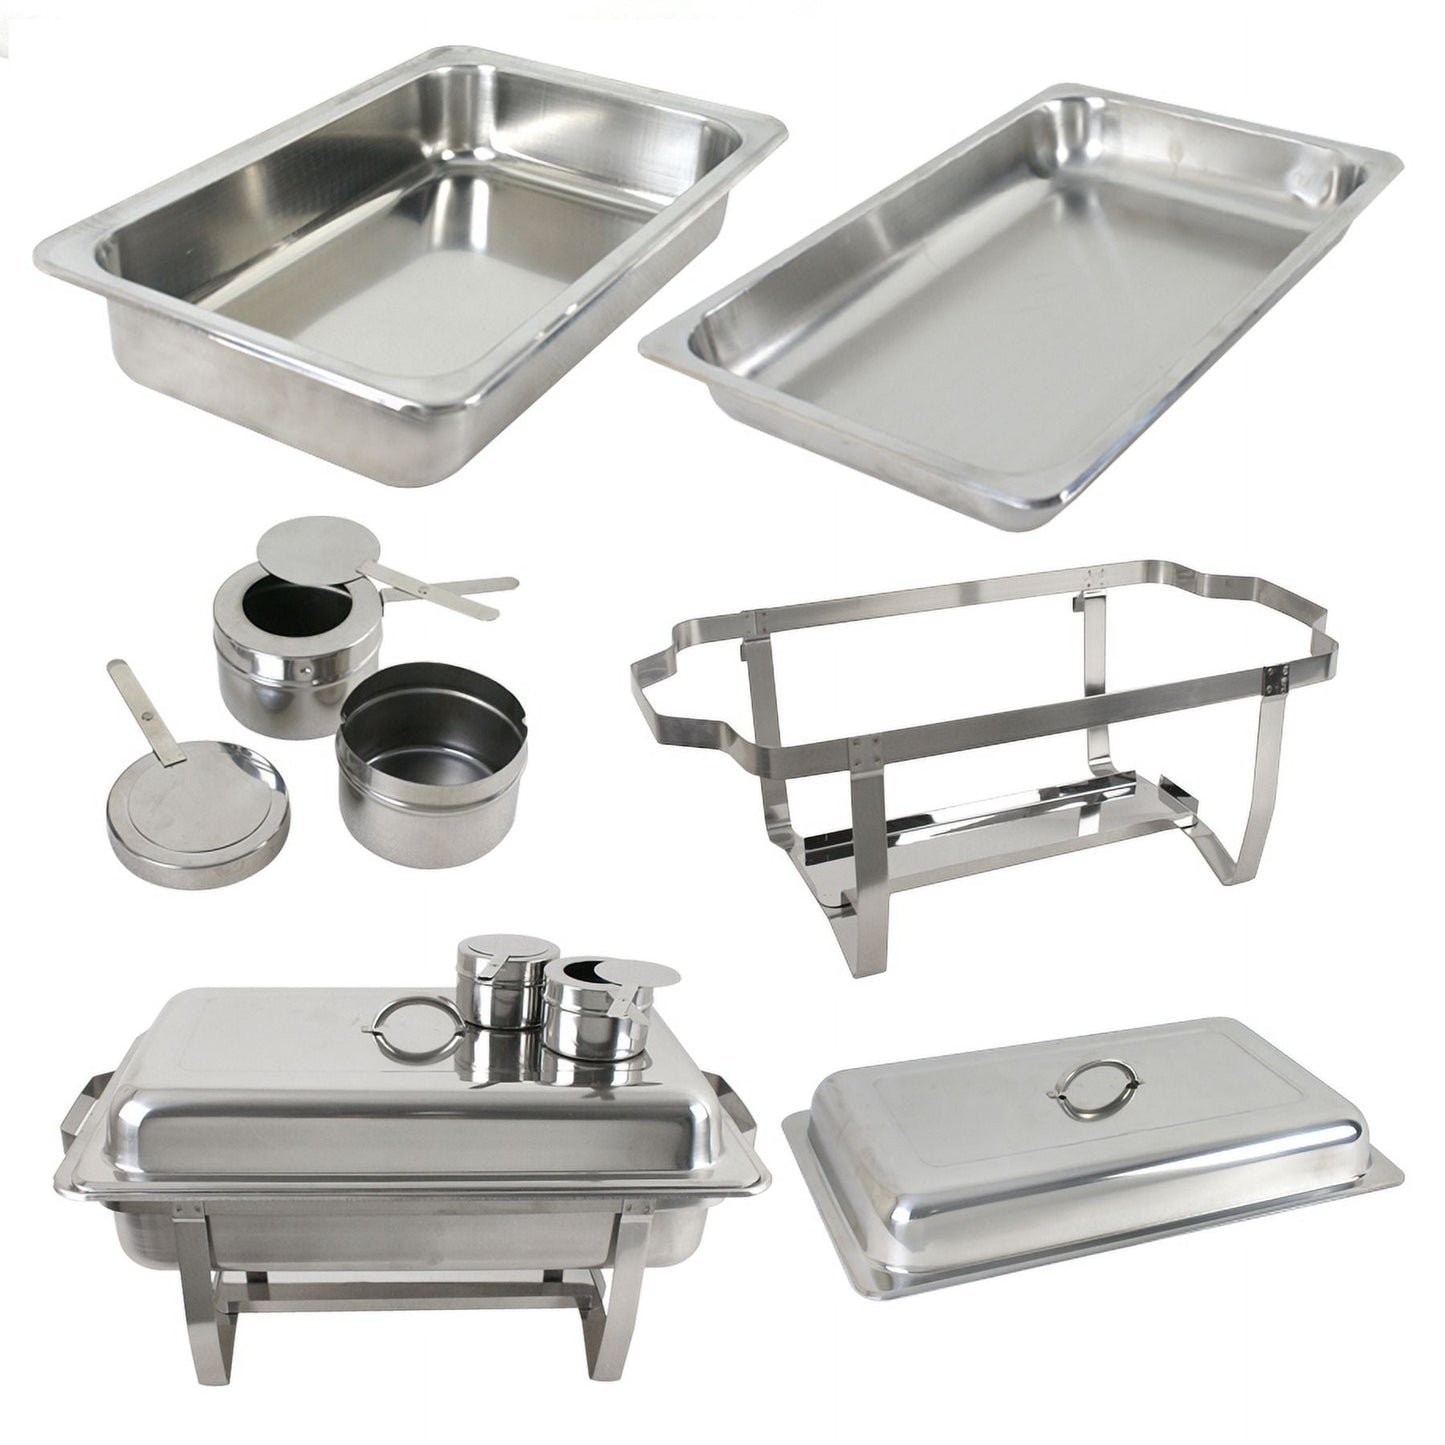 Zeny Rectangular Chafing Dish 8 Quart Stainless Steel Buffer Warmer Set, Pack of 6 Silver